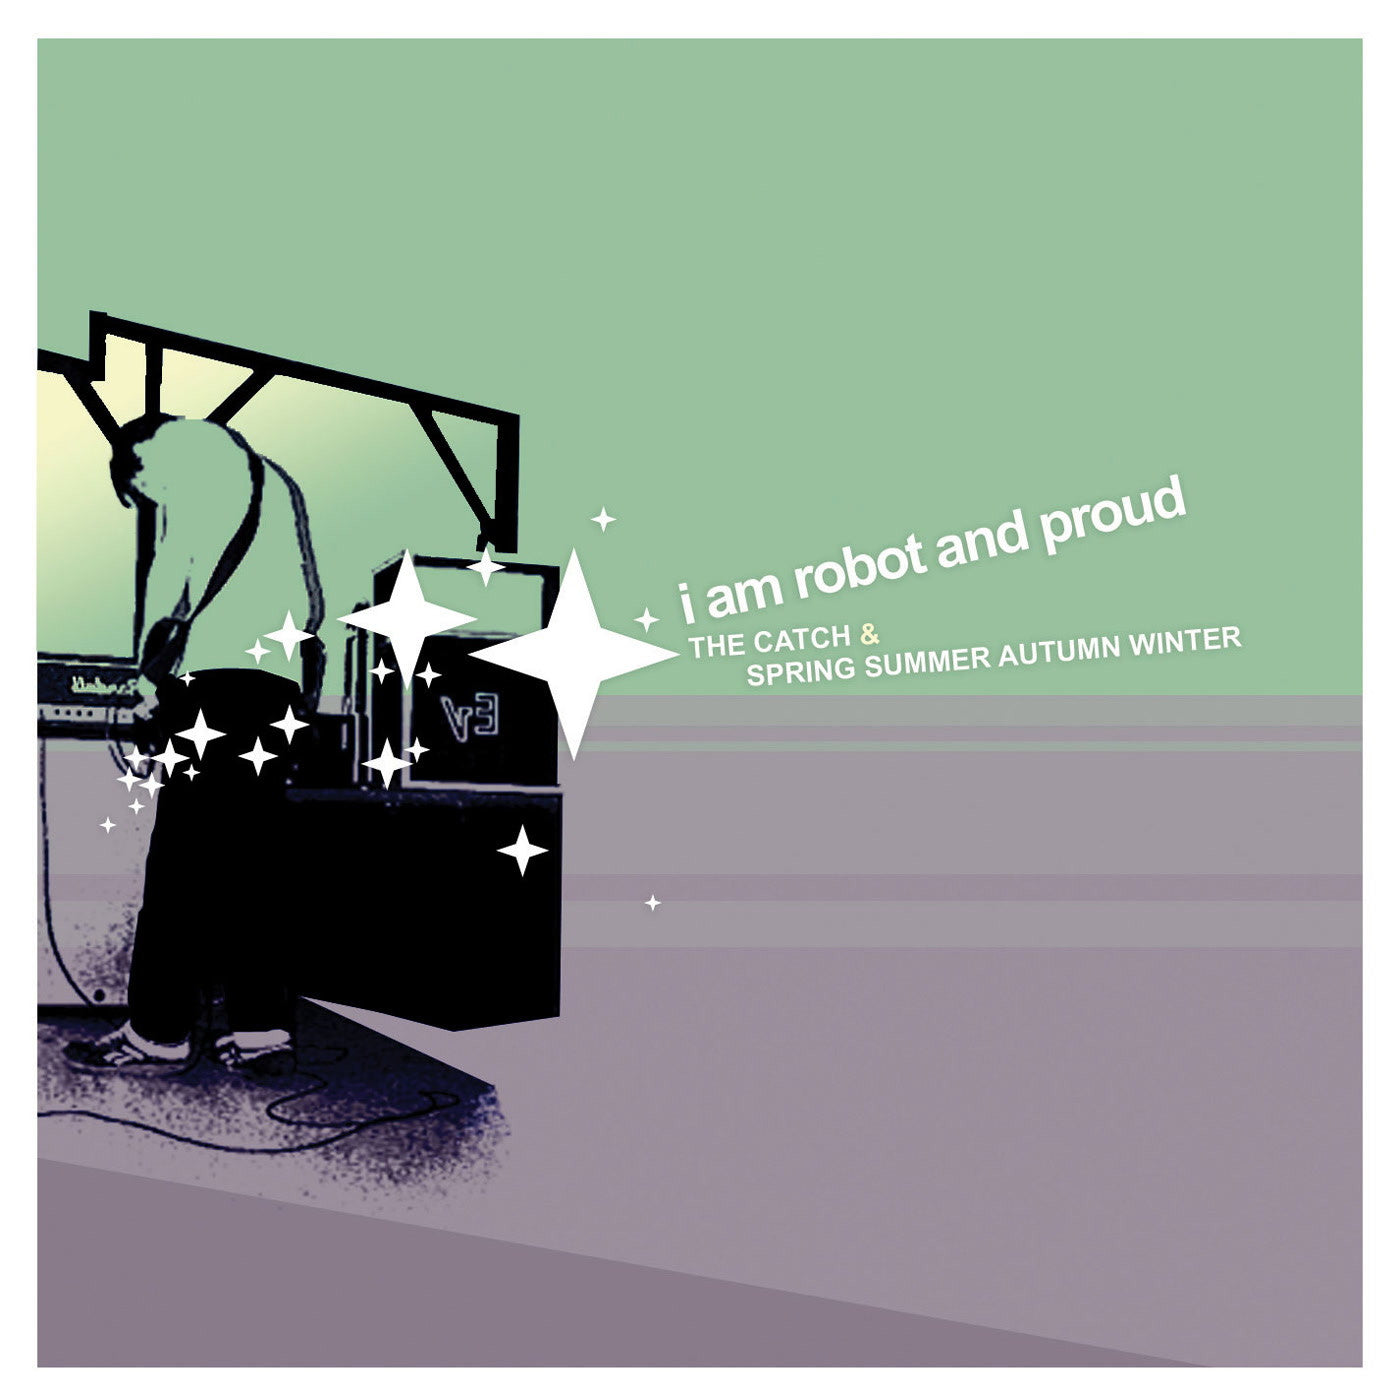 I Am Robot And Proud - The Catch & Spring Summer Autumn Winter